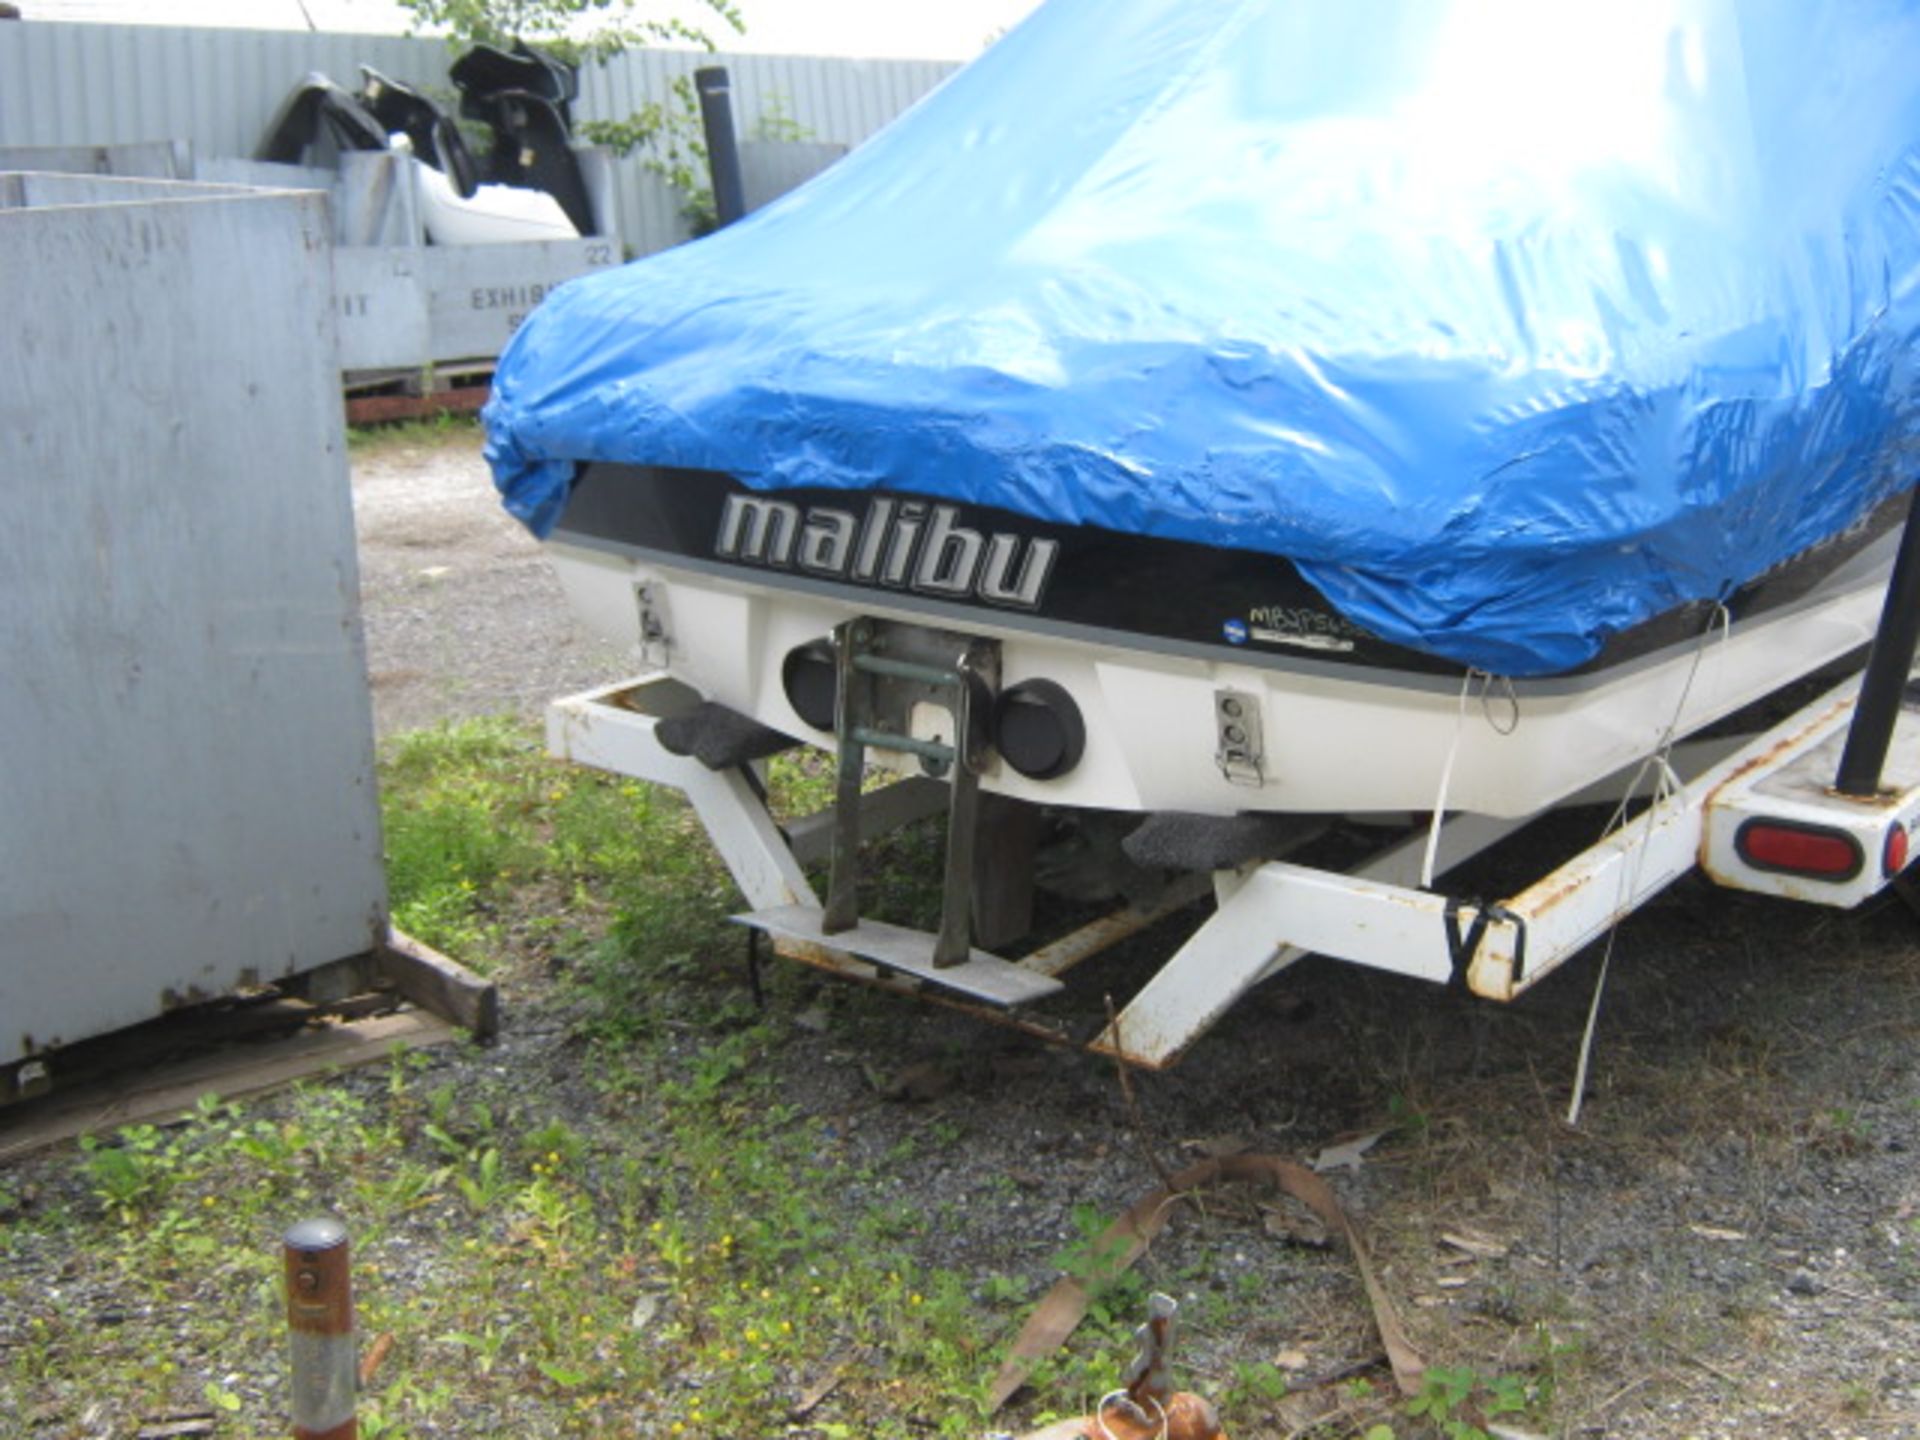 MALIBU (2006) RESPONSE 210 LXI 21' SKI BOAT WITH 320 HP INBOARD  (TRAILER NOT AVAILABLE) - Image 3 of 5